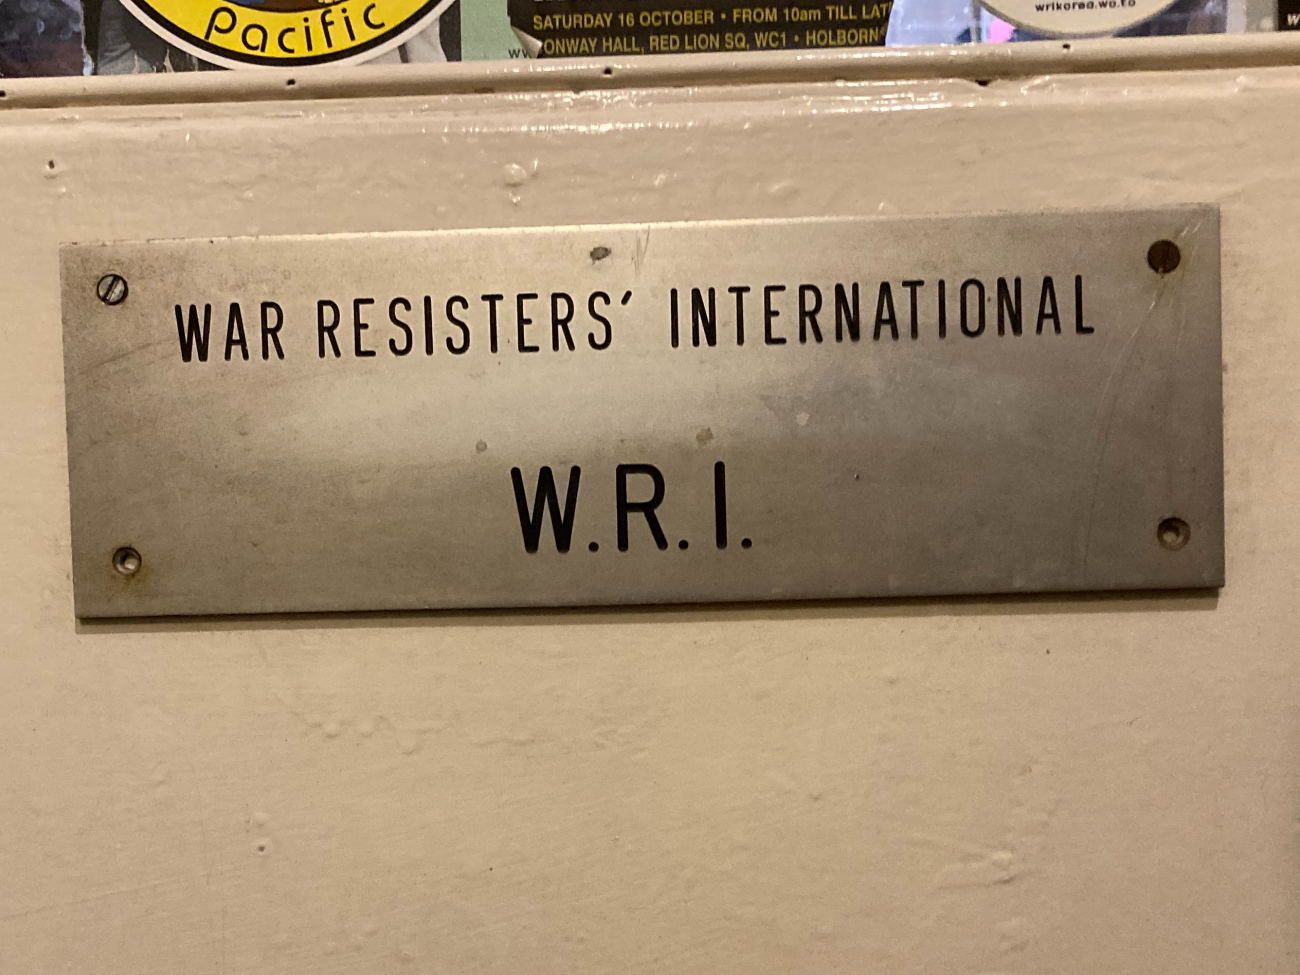 The WRI nameplate on the office door